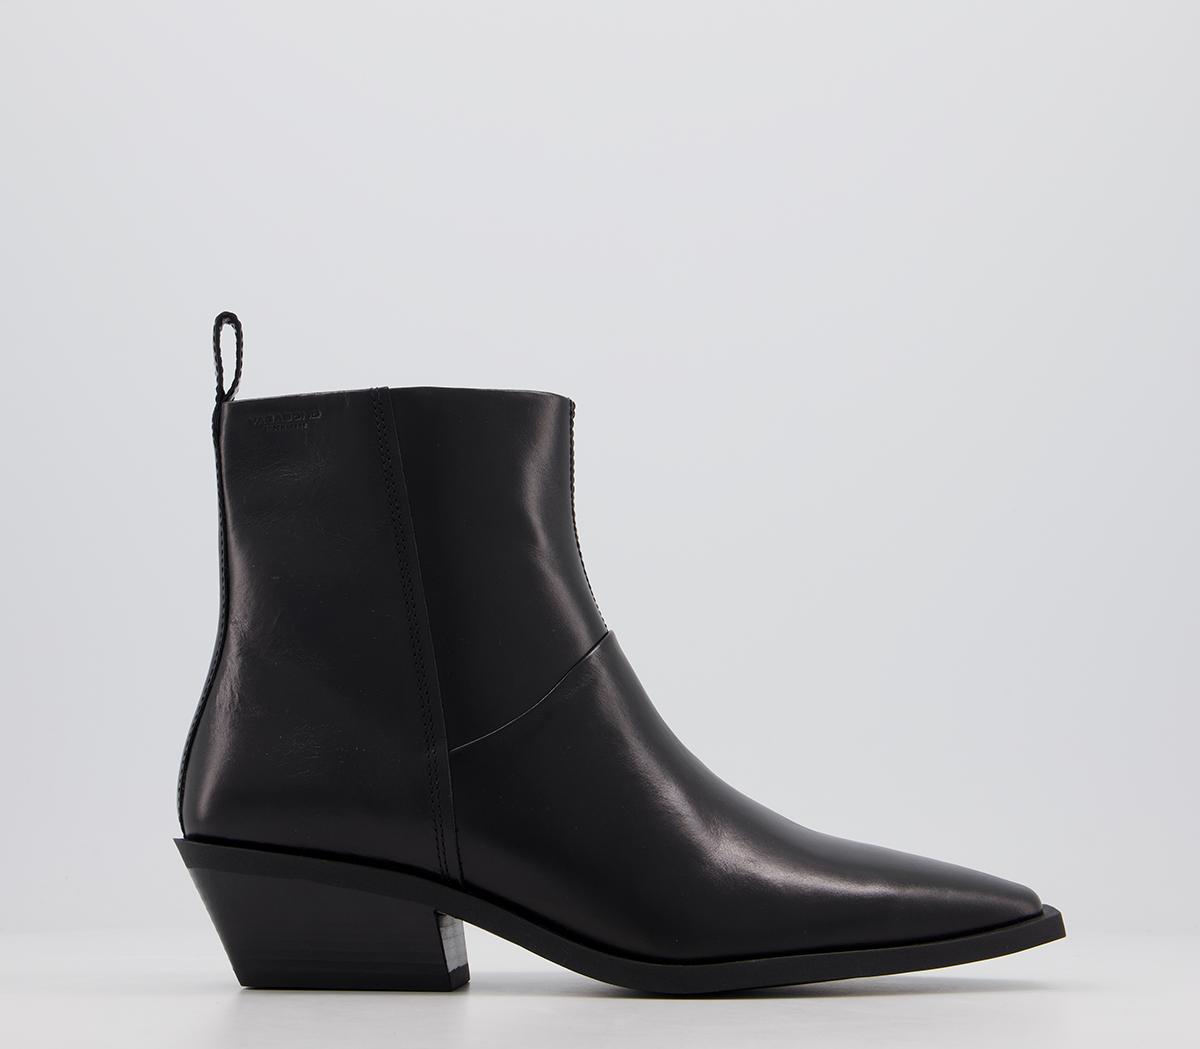 Vagabond Shoemakers Ally Chelsea Boots Black - Women's Ankle Boots